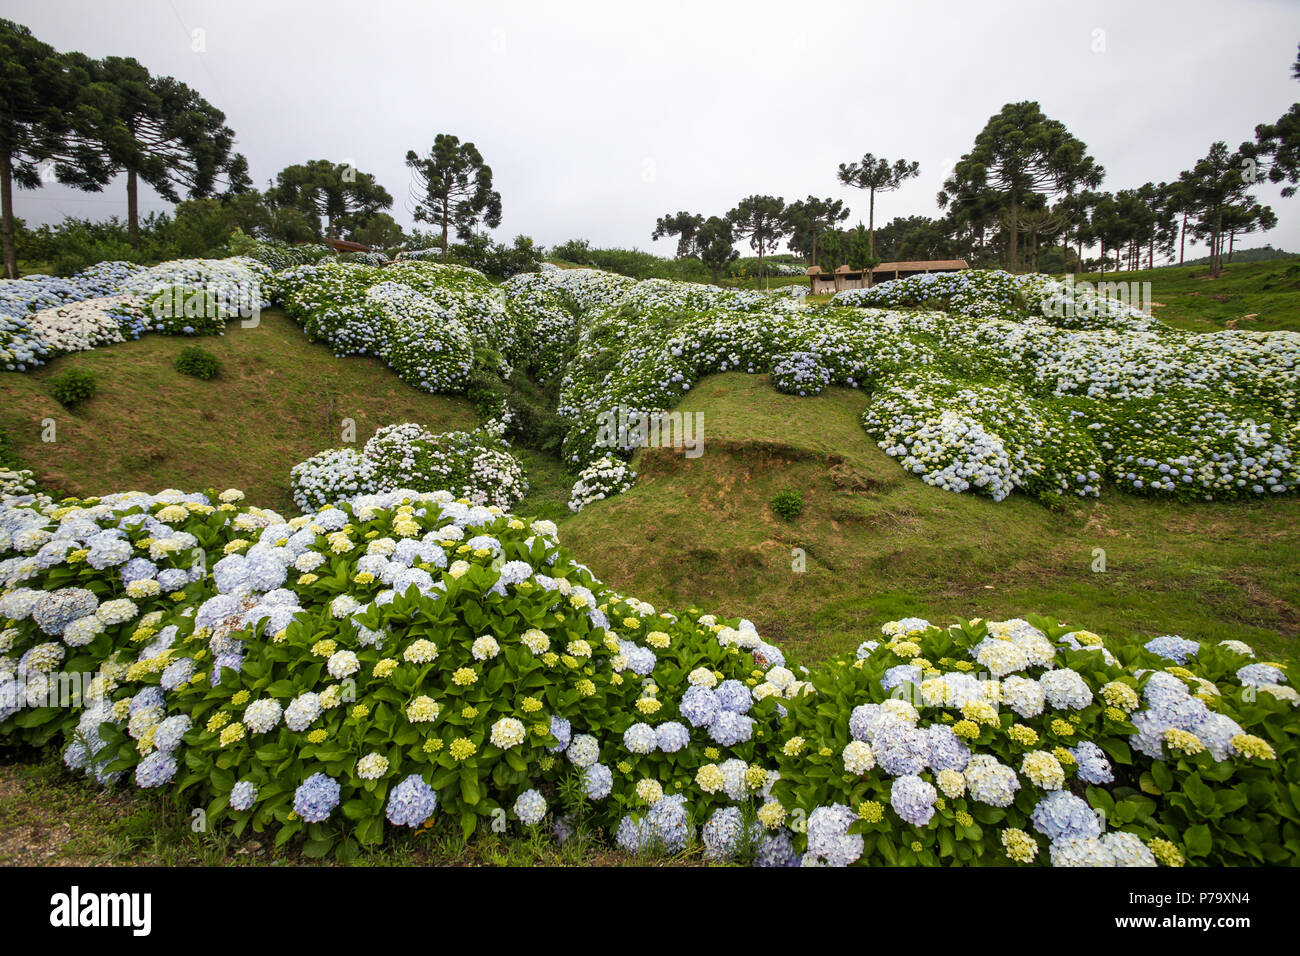 Santa Catarina, Brazil. View of a beautiful landscape grassy mountain with hydrangeas flowers and trees in winter. Stock Photo